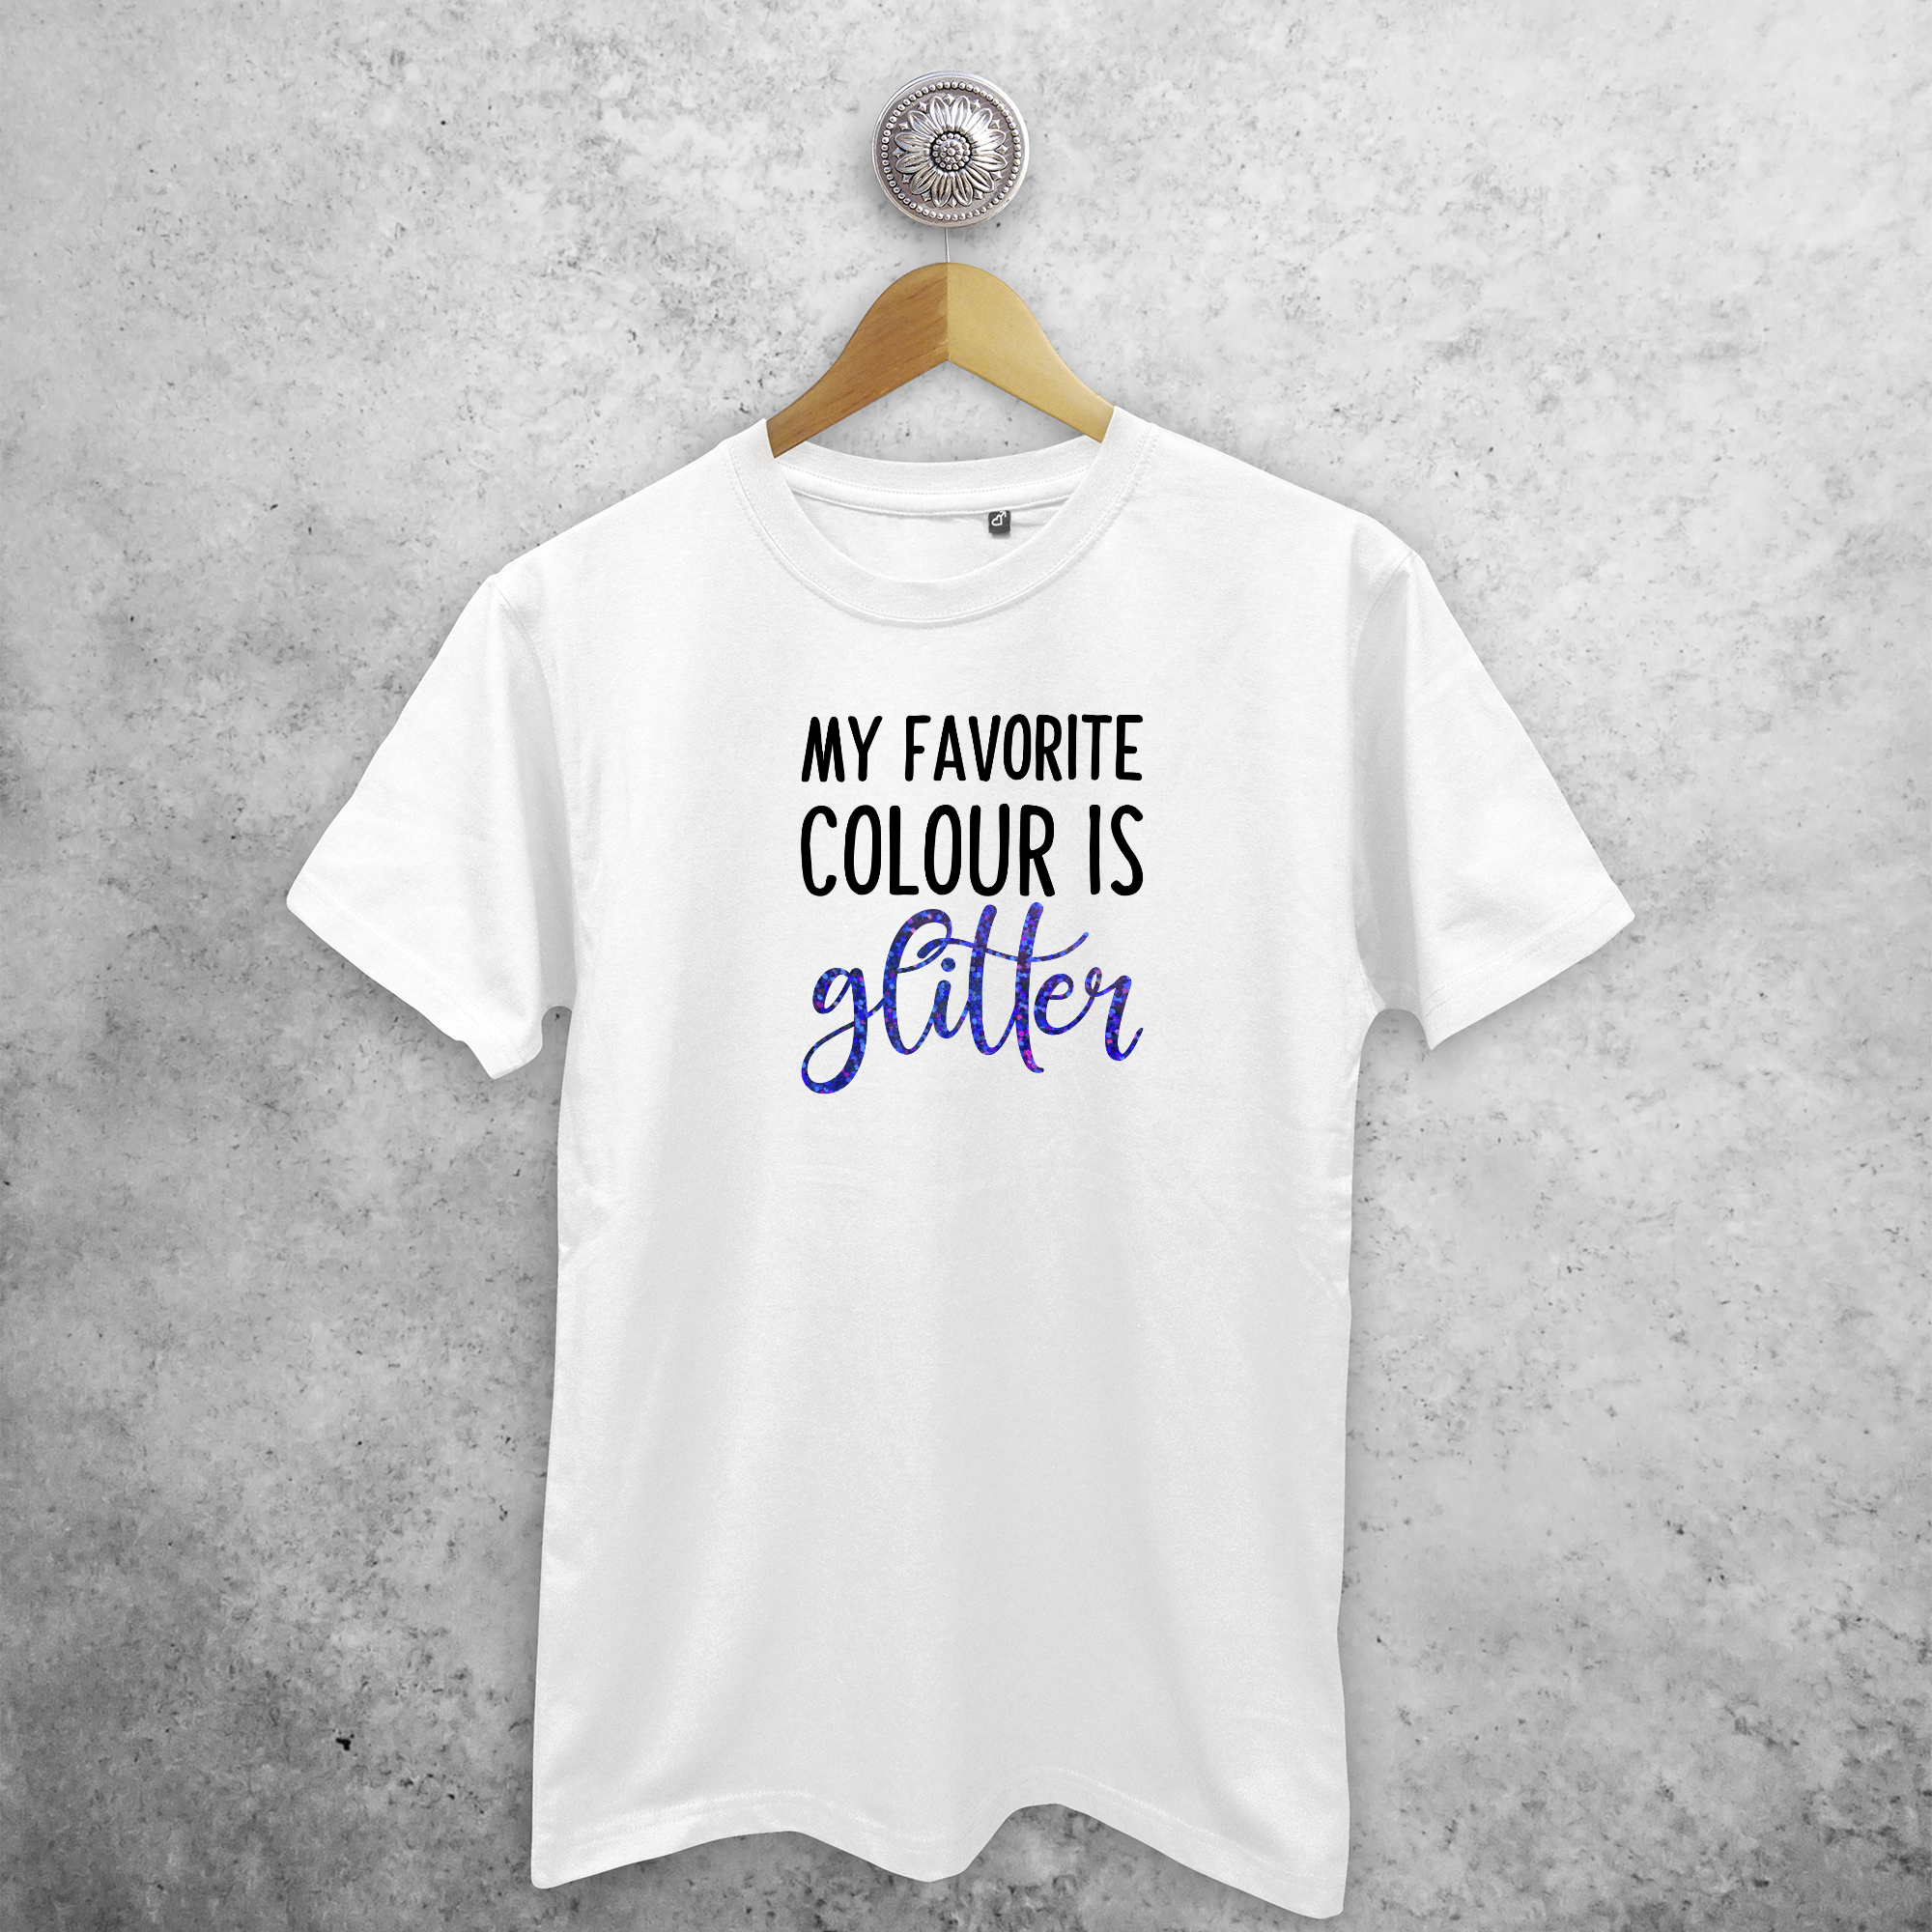 'My favorite colour is glitter' adult shirt